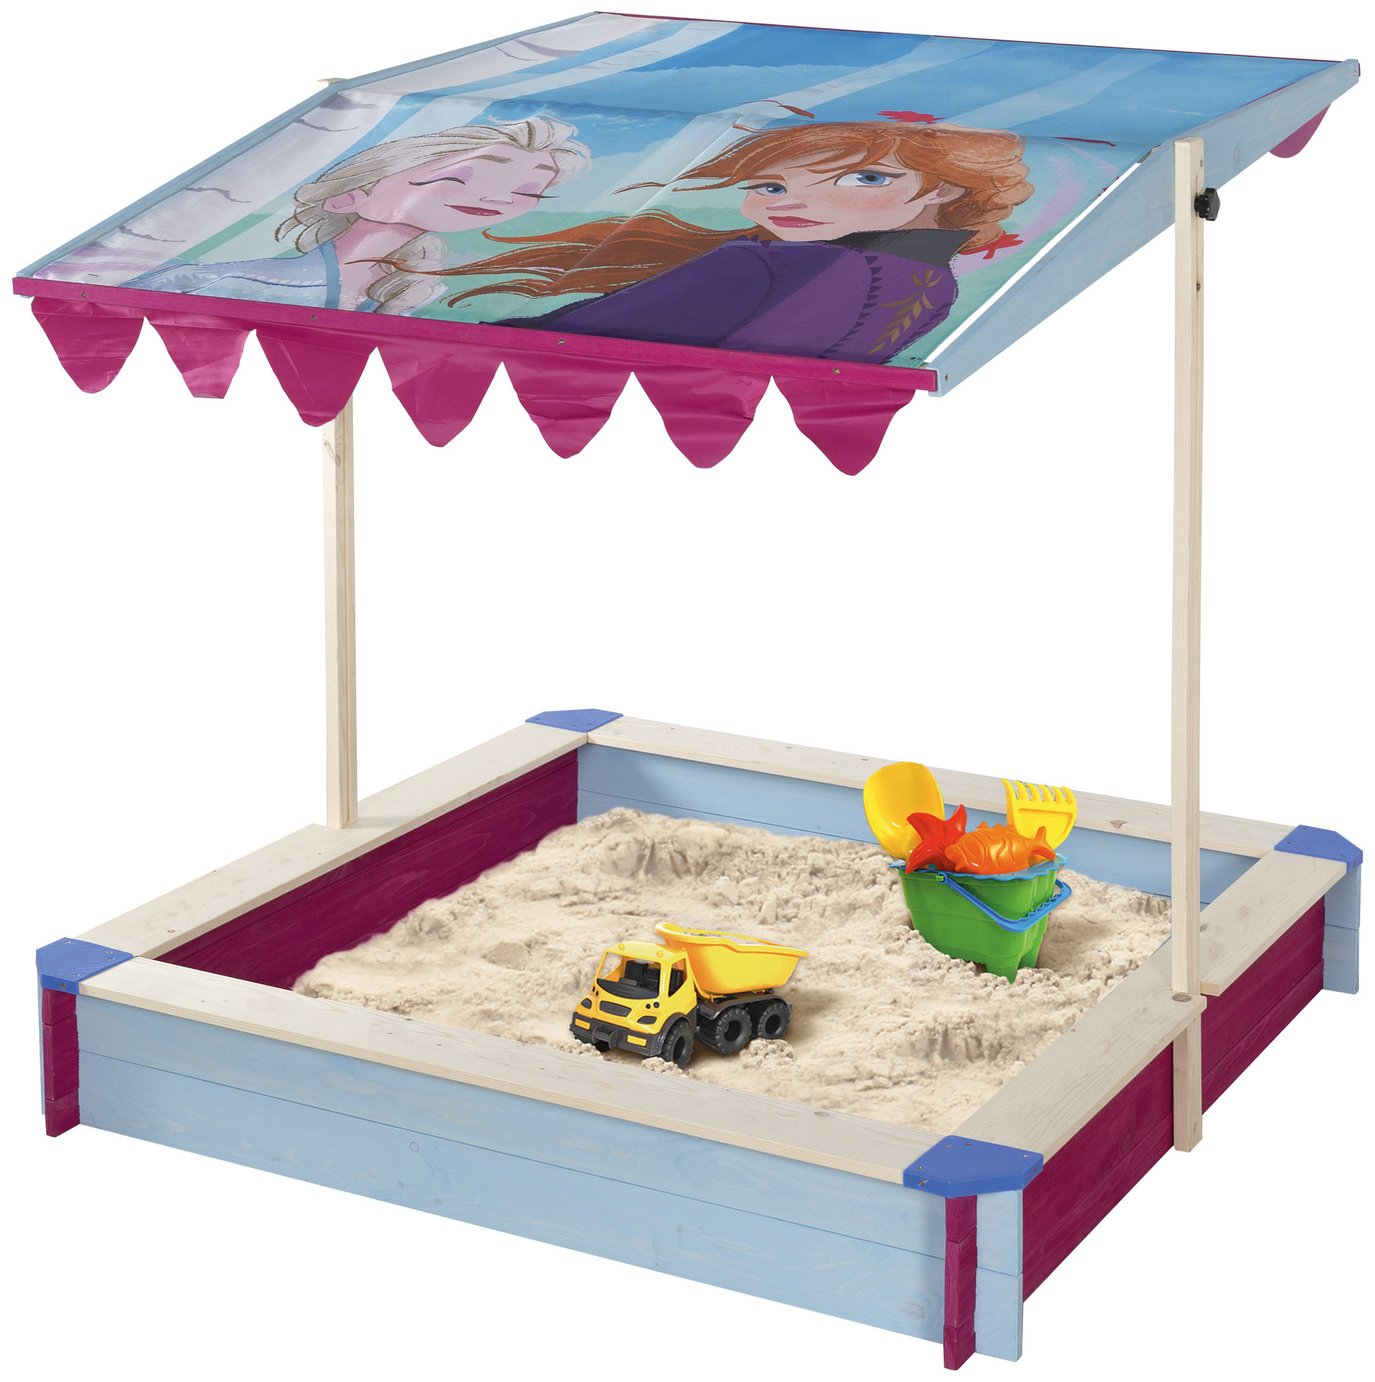 Frozen 2 Sandpit with Roof review